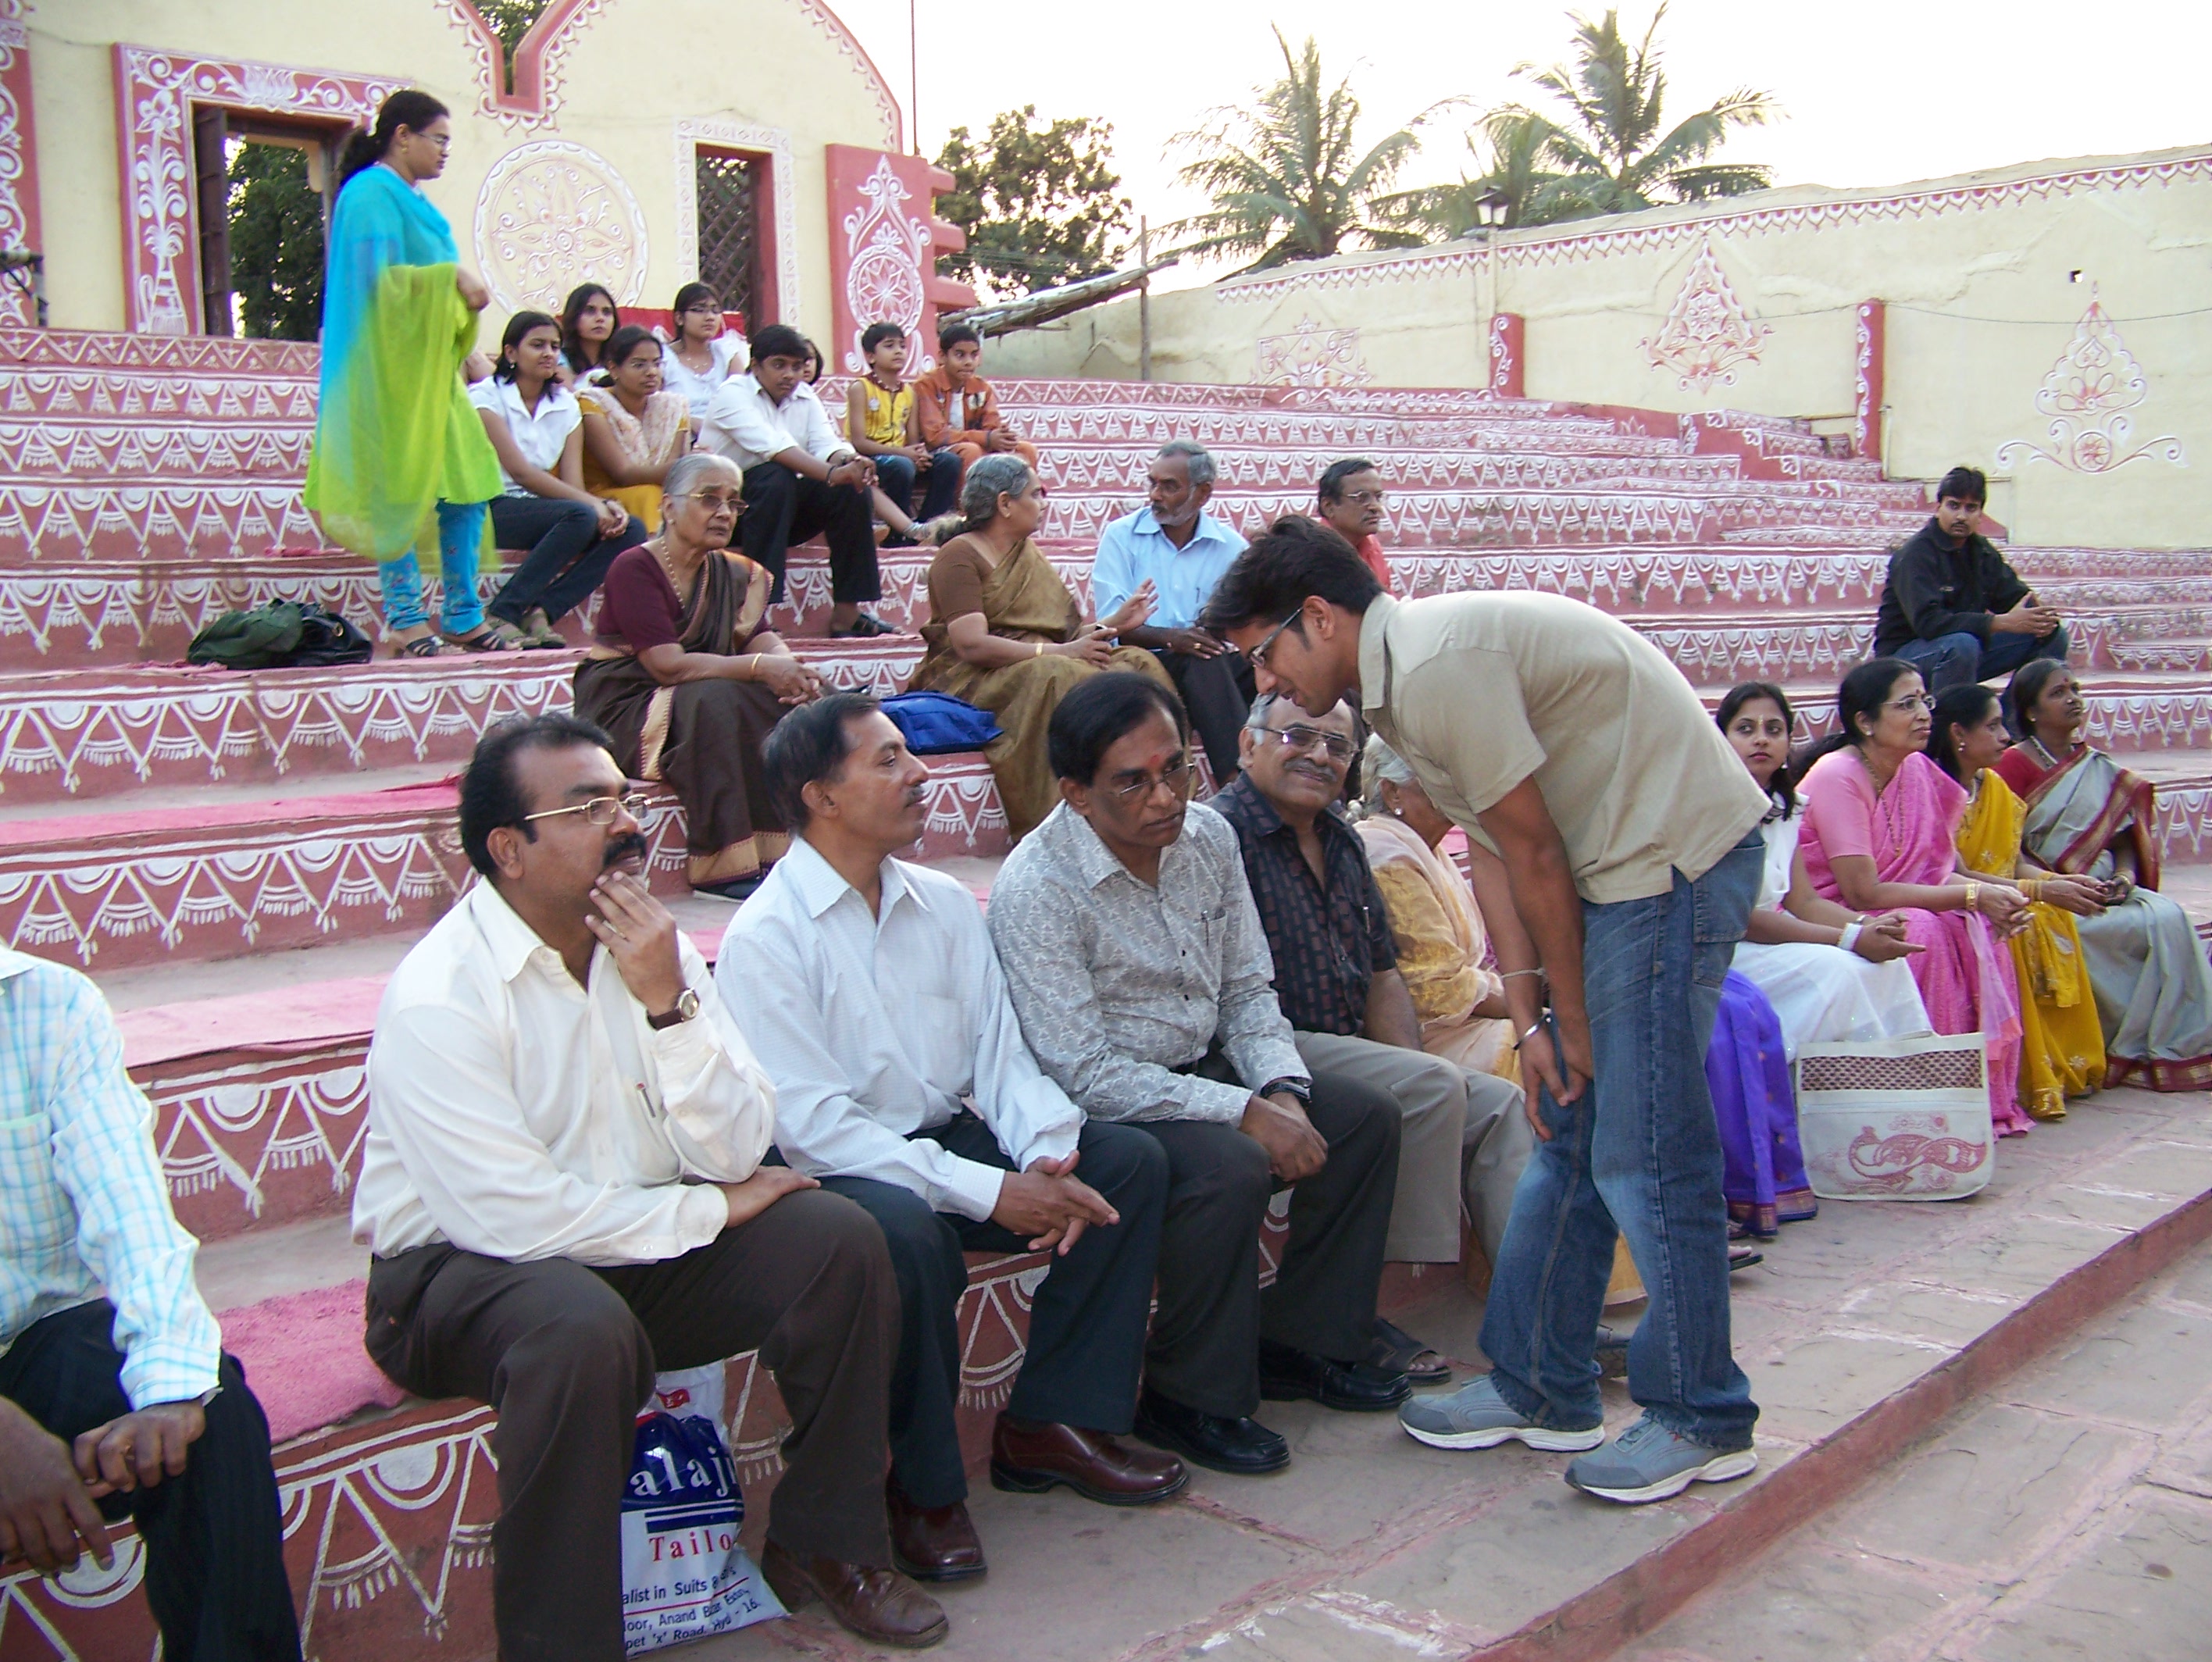 Members of Rafi Foundation, Hyderabad Chapter at PADHARO SE musical show on 25th December 2008 